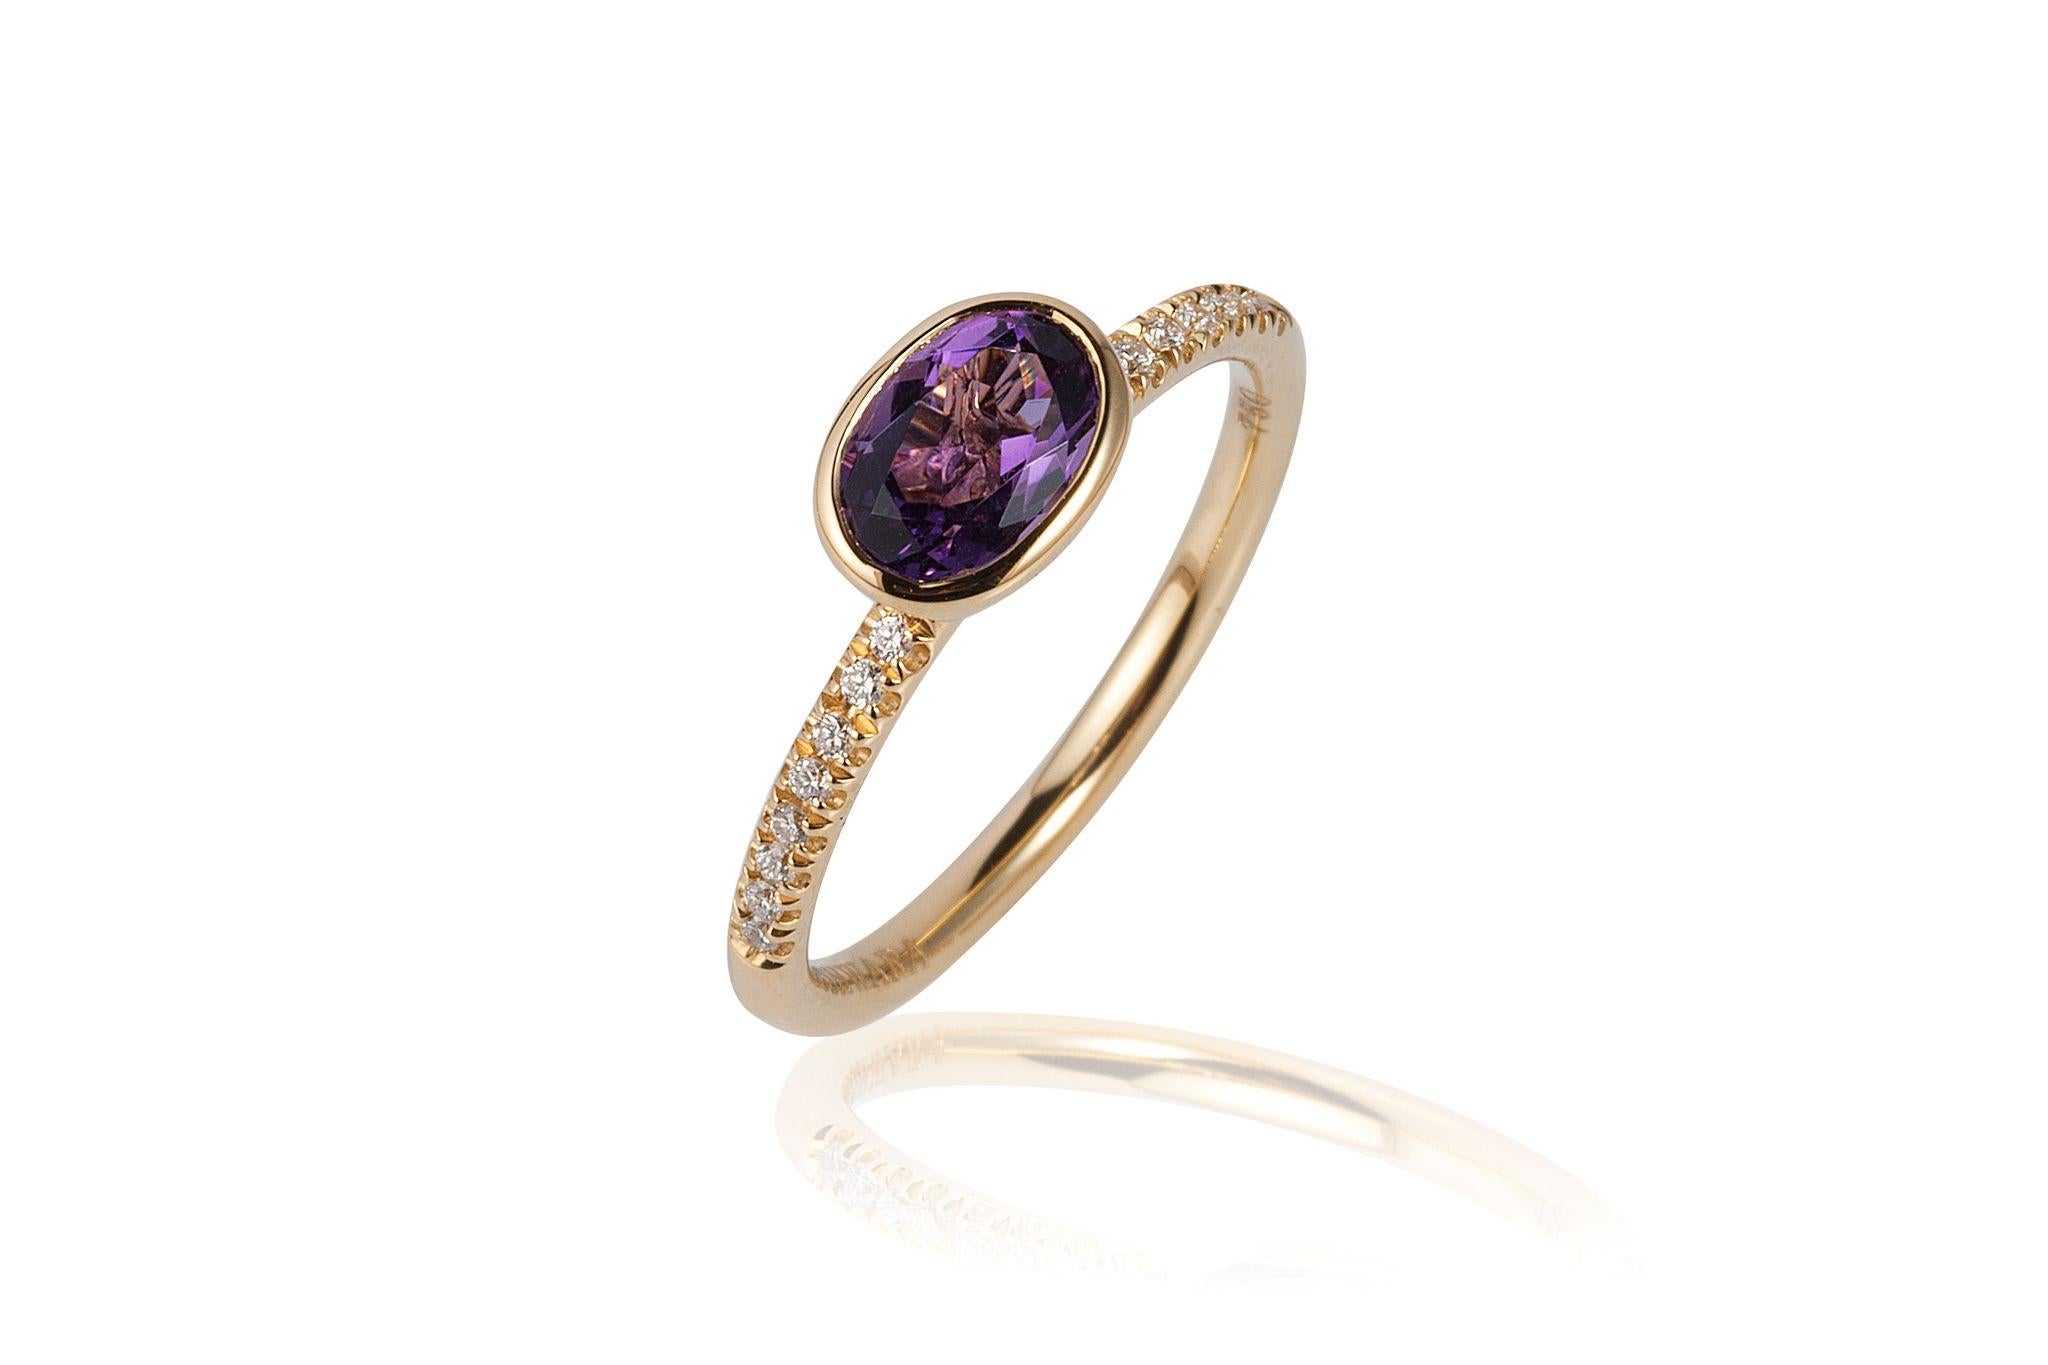 Amethyst Faceted Oval Ring with Diamond in 18K Yellow Gold, from ’Gossip' Collection

Stone Size: 7 x 5 mm

Gemstone Approx. Wt: Amethyst- 0.77 Carats

Diamonds: G-H / VS, Approx. Wt: 0.08 Carats